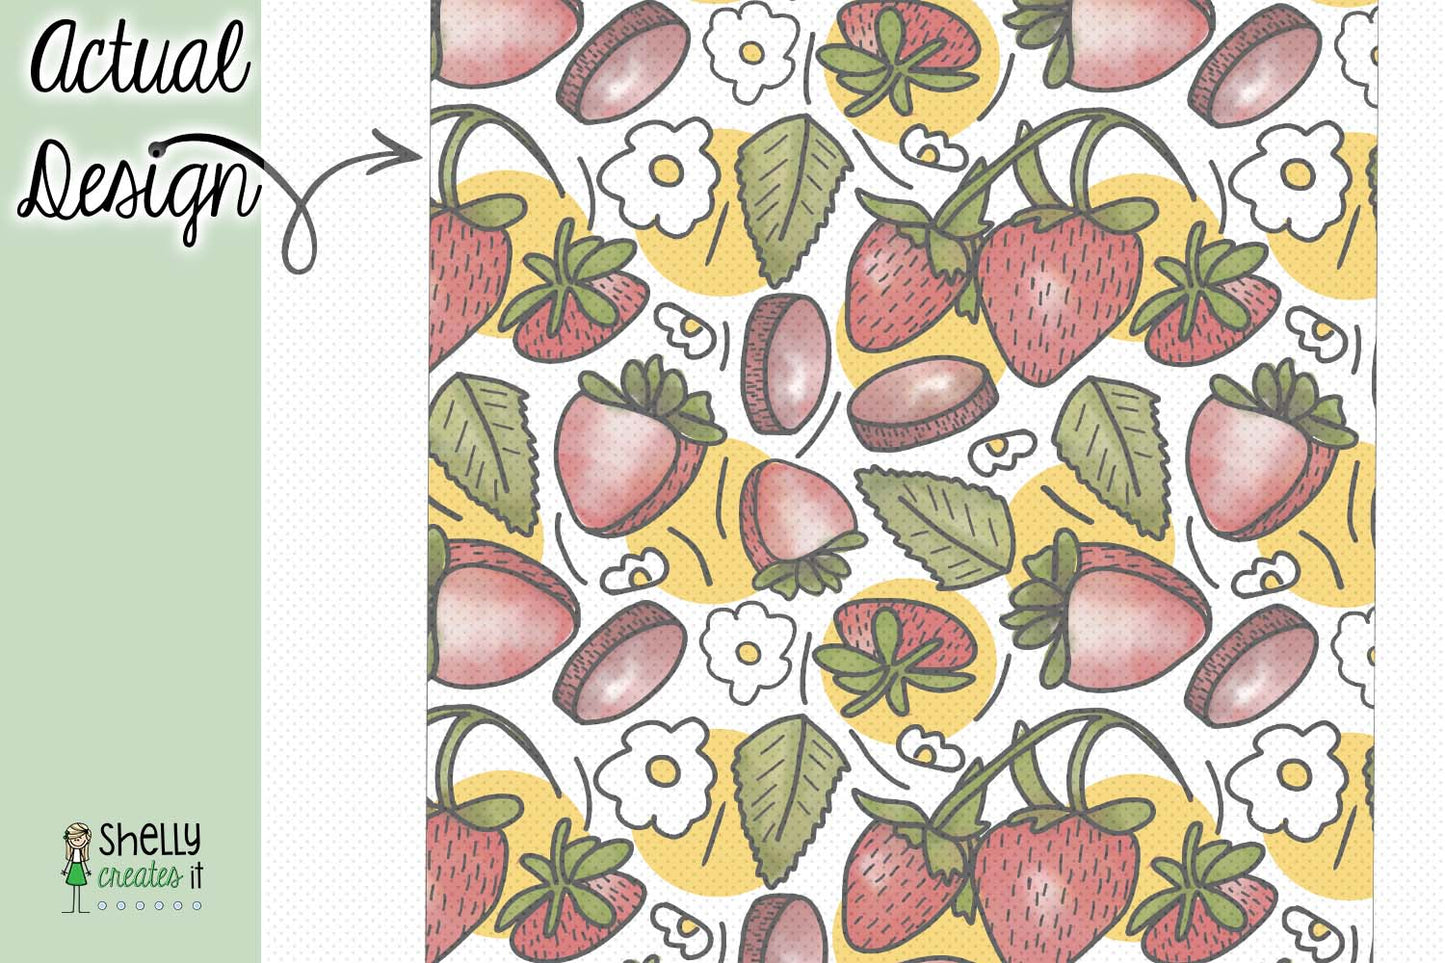 Strawberry Clipart - SVG, JPG, PNG - Hand Drawn watercolor and repeating pattern